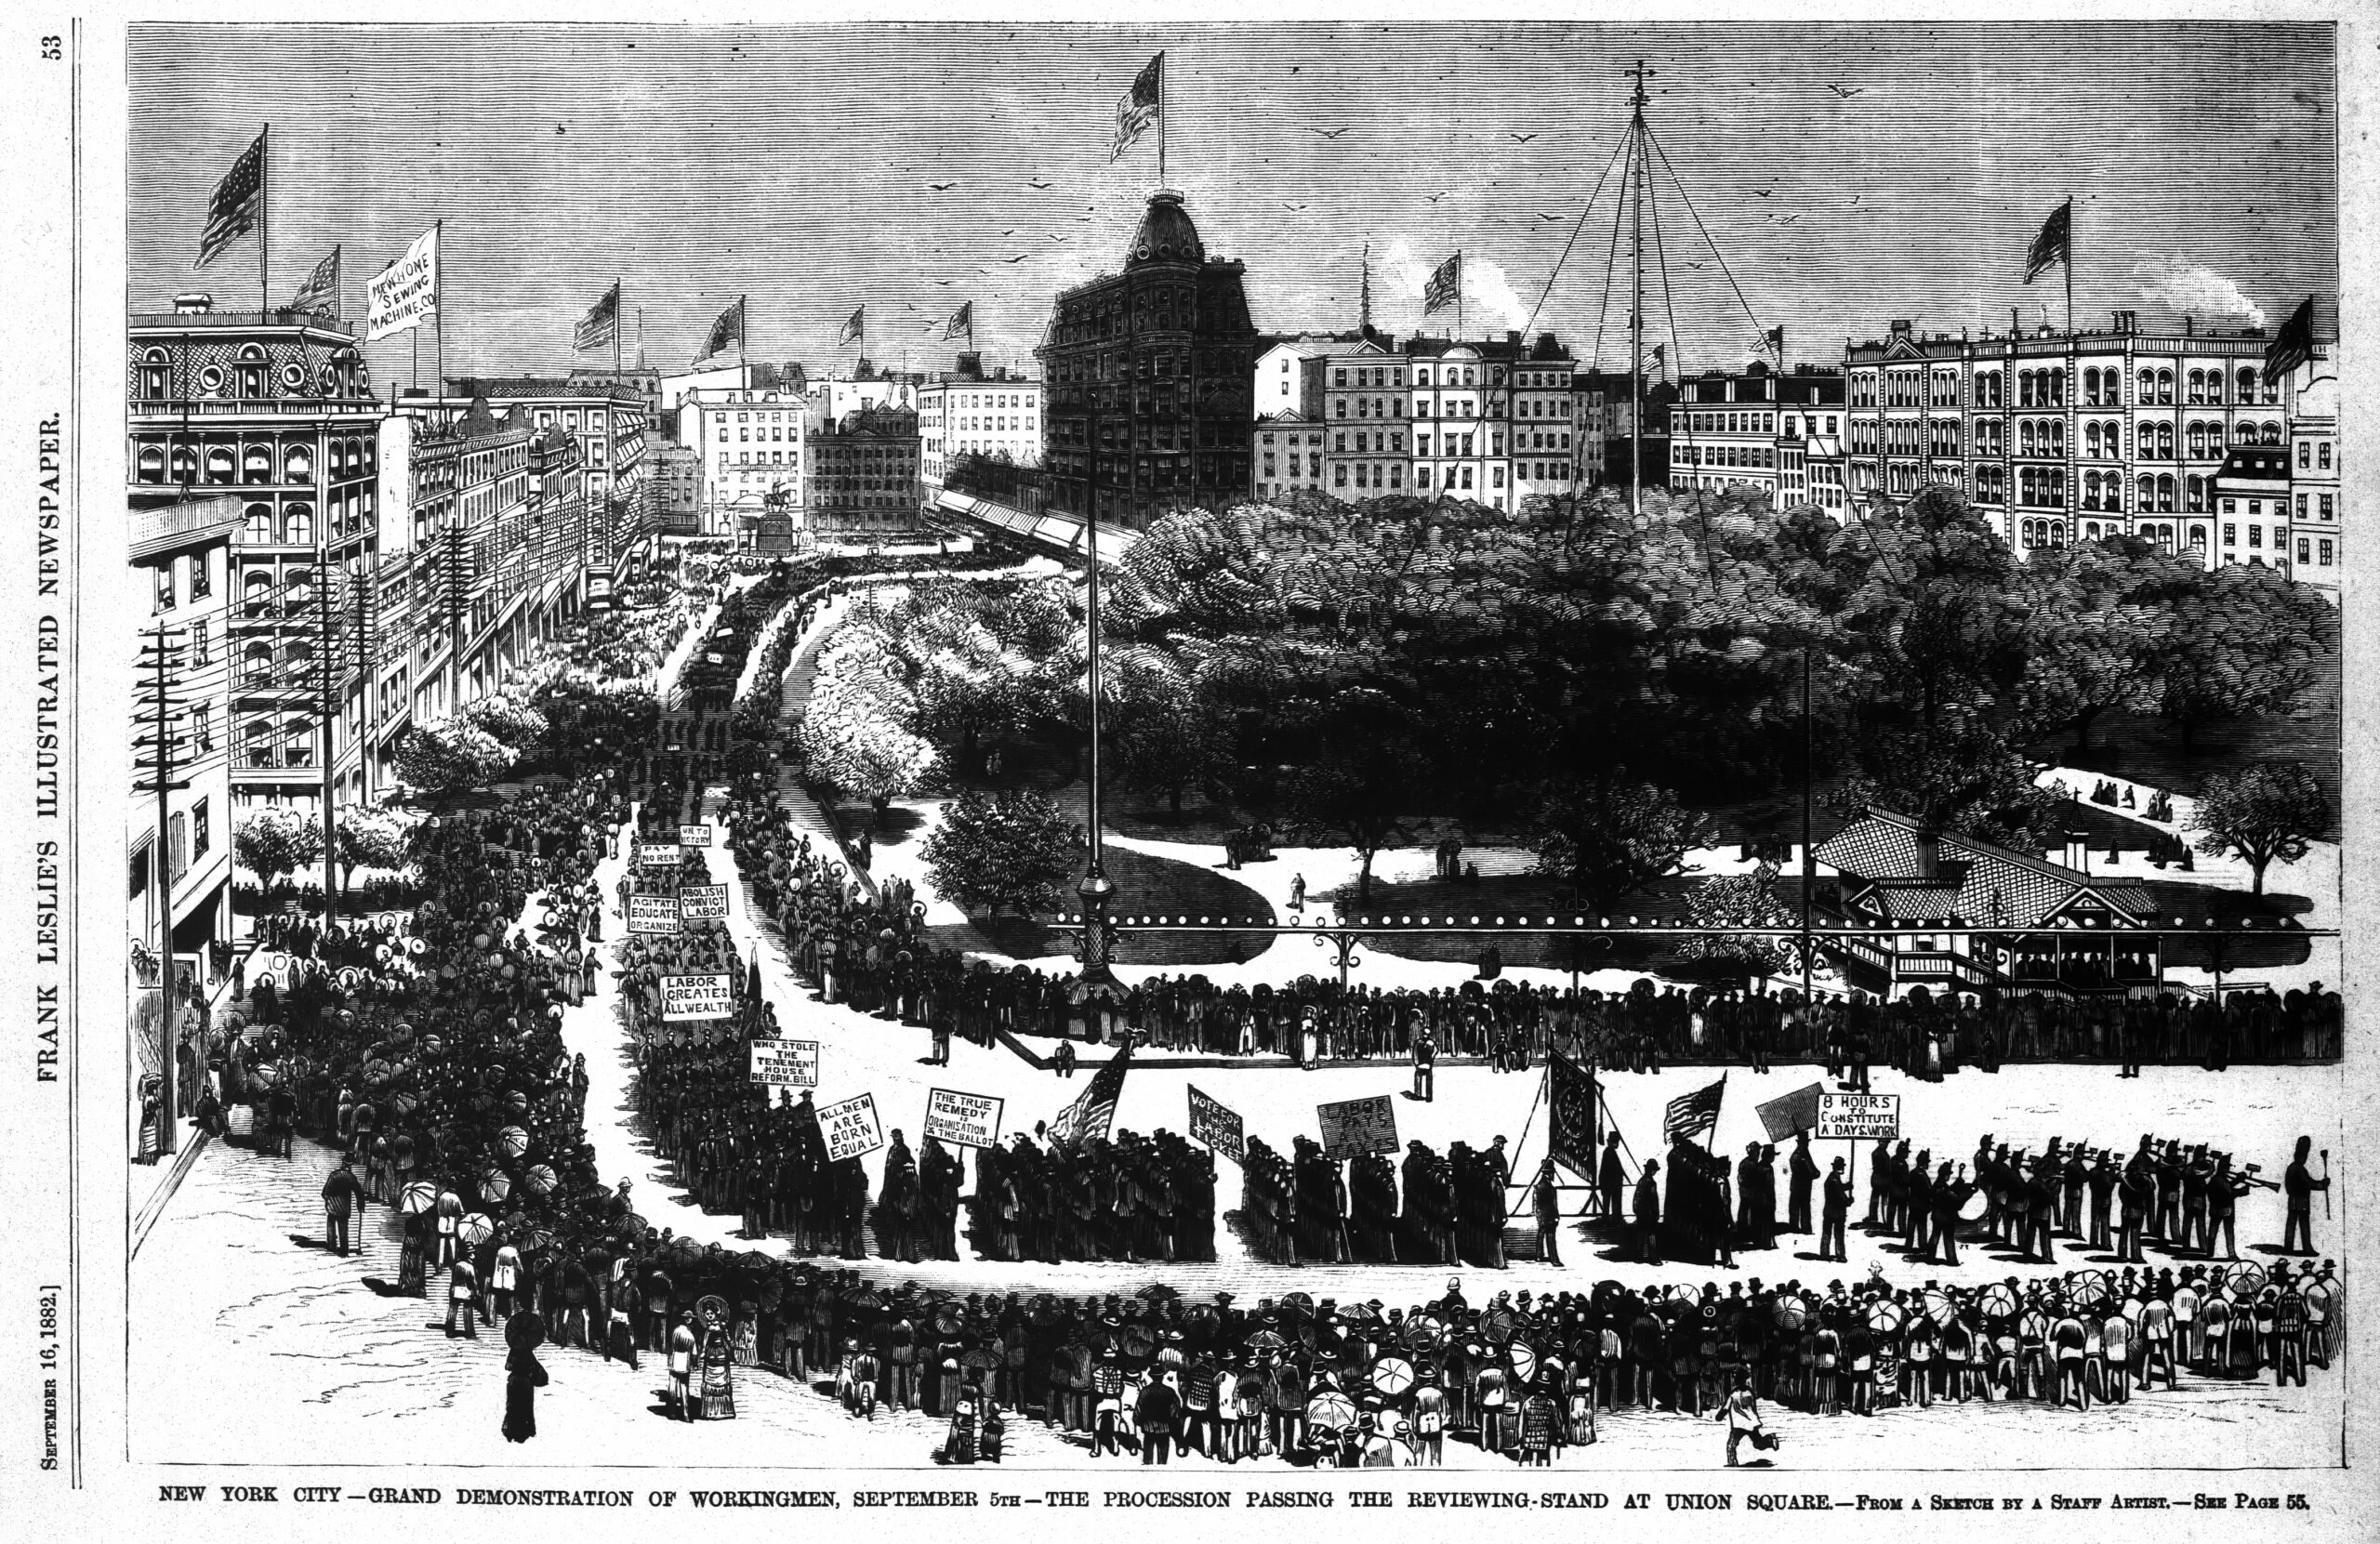 Illustration of the first American Labor parade held in New York City on September 5, 1882 as it appeared in Frank Leslie's Weekly Illustrated Newspaper's September 16, 1882 issue.